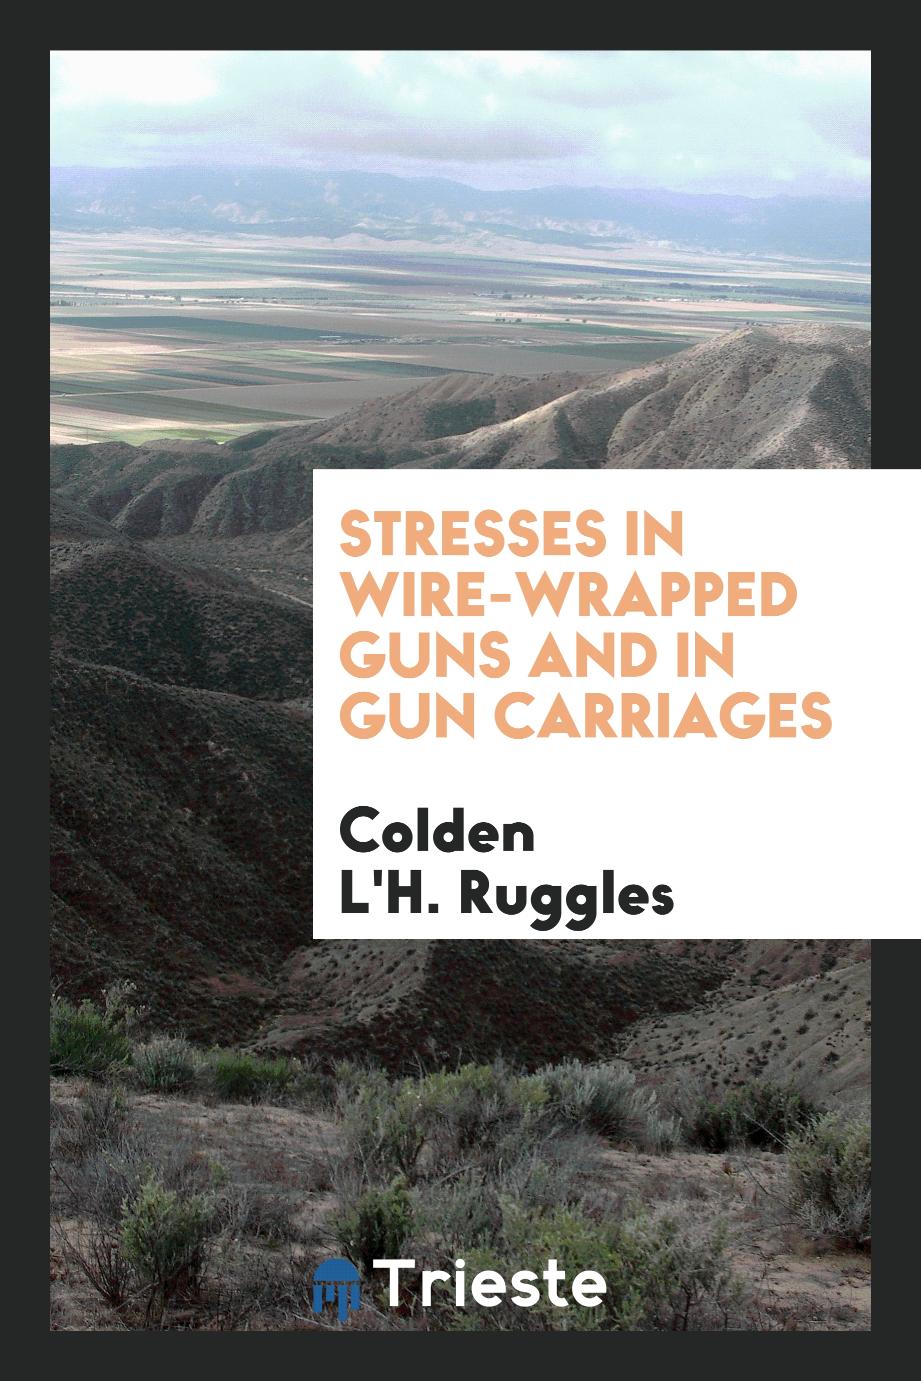 Stresses in wire-wrapped guns and in gun carriages